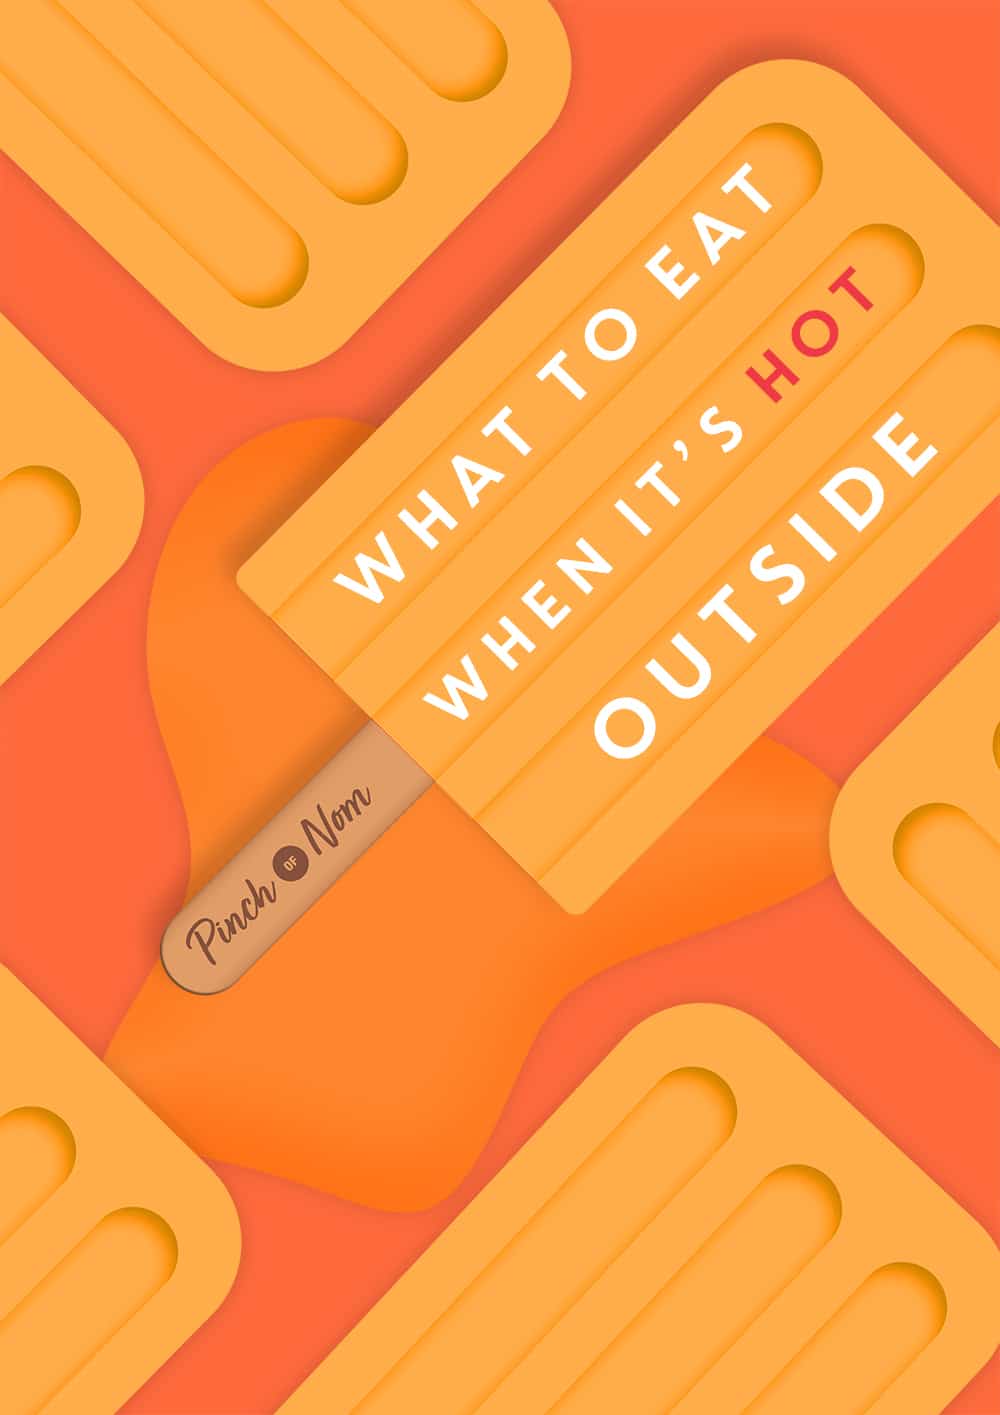 The words 'What to Eat When it's Hot Outside' are placed on a bright-orange background decorated with ice lollies. The central ice lolly has a stick with the Pinch of Nom logo on it.